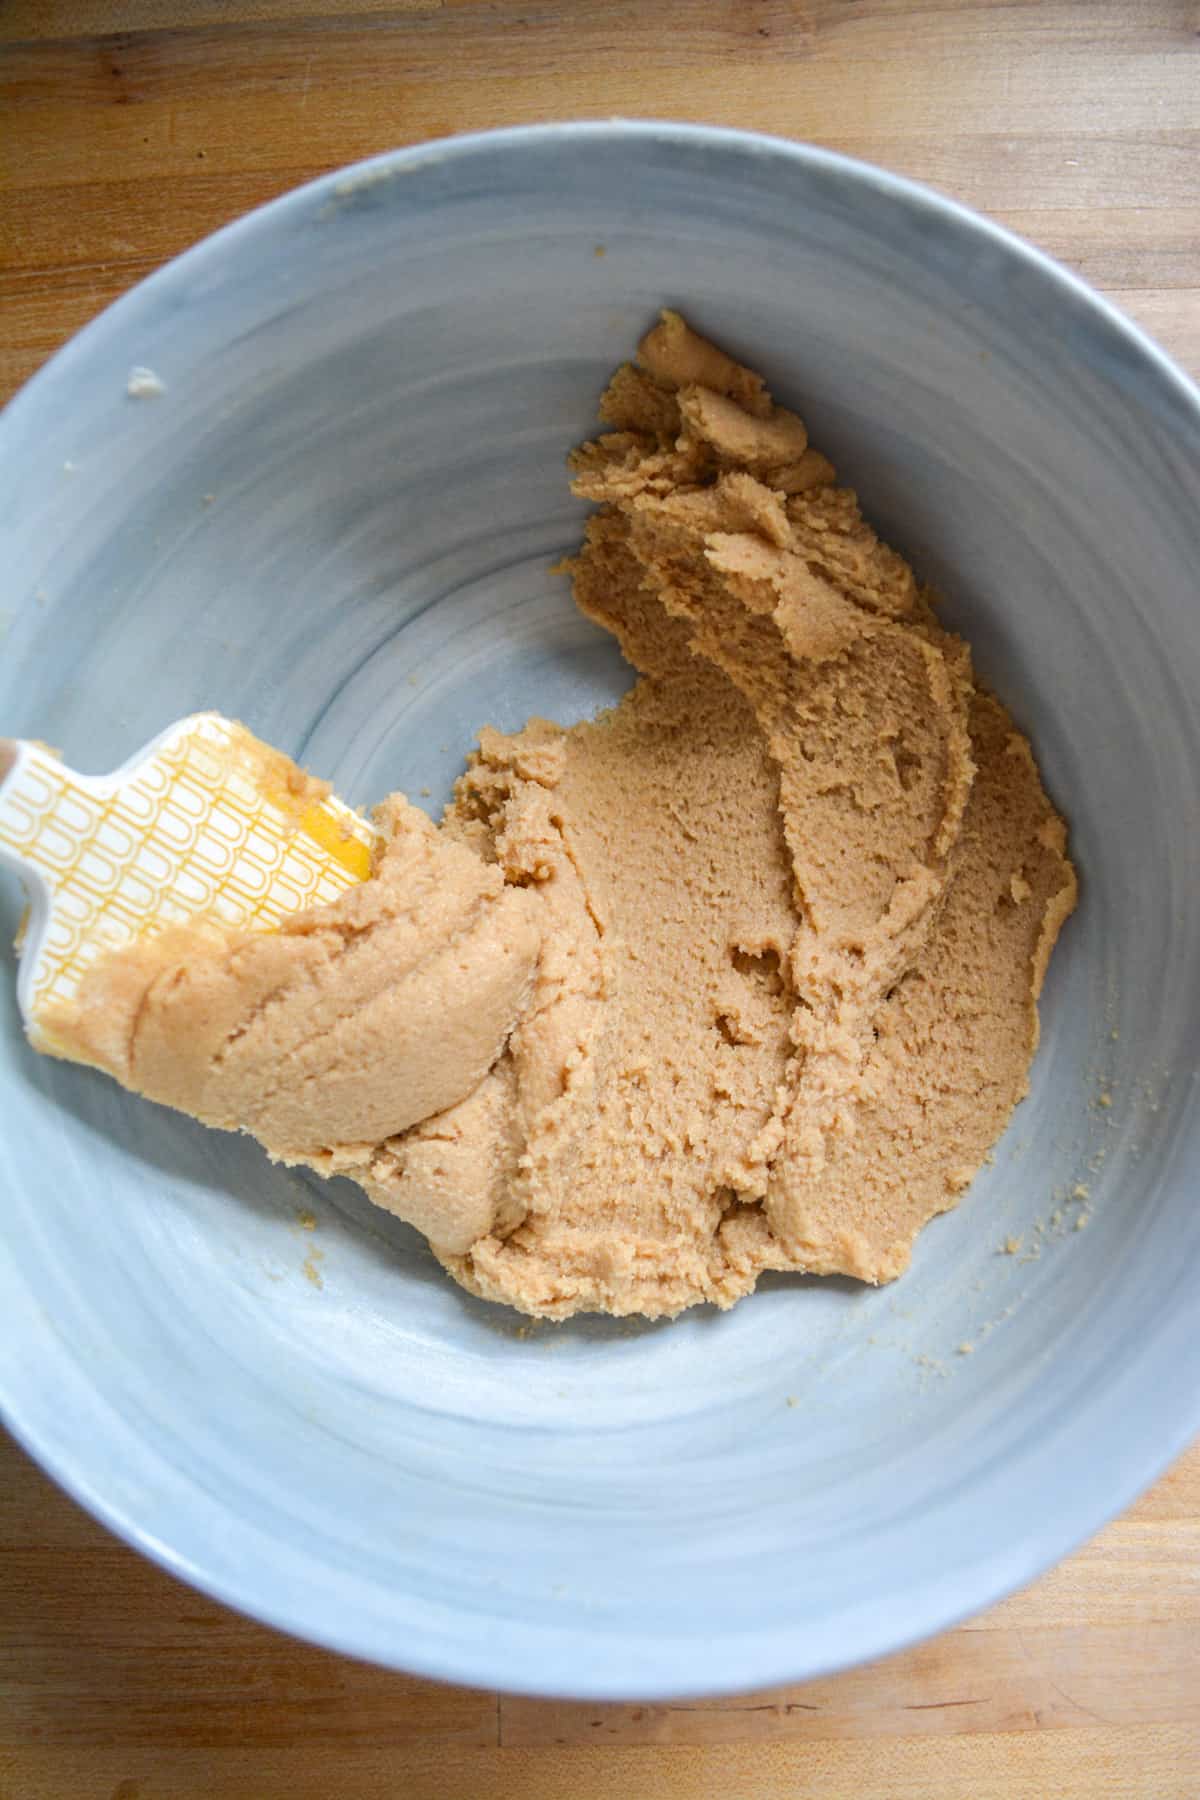 Vegan butter and brown sugar creamed together in a bowl with a spatula.